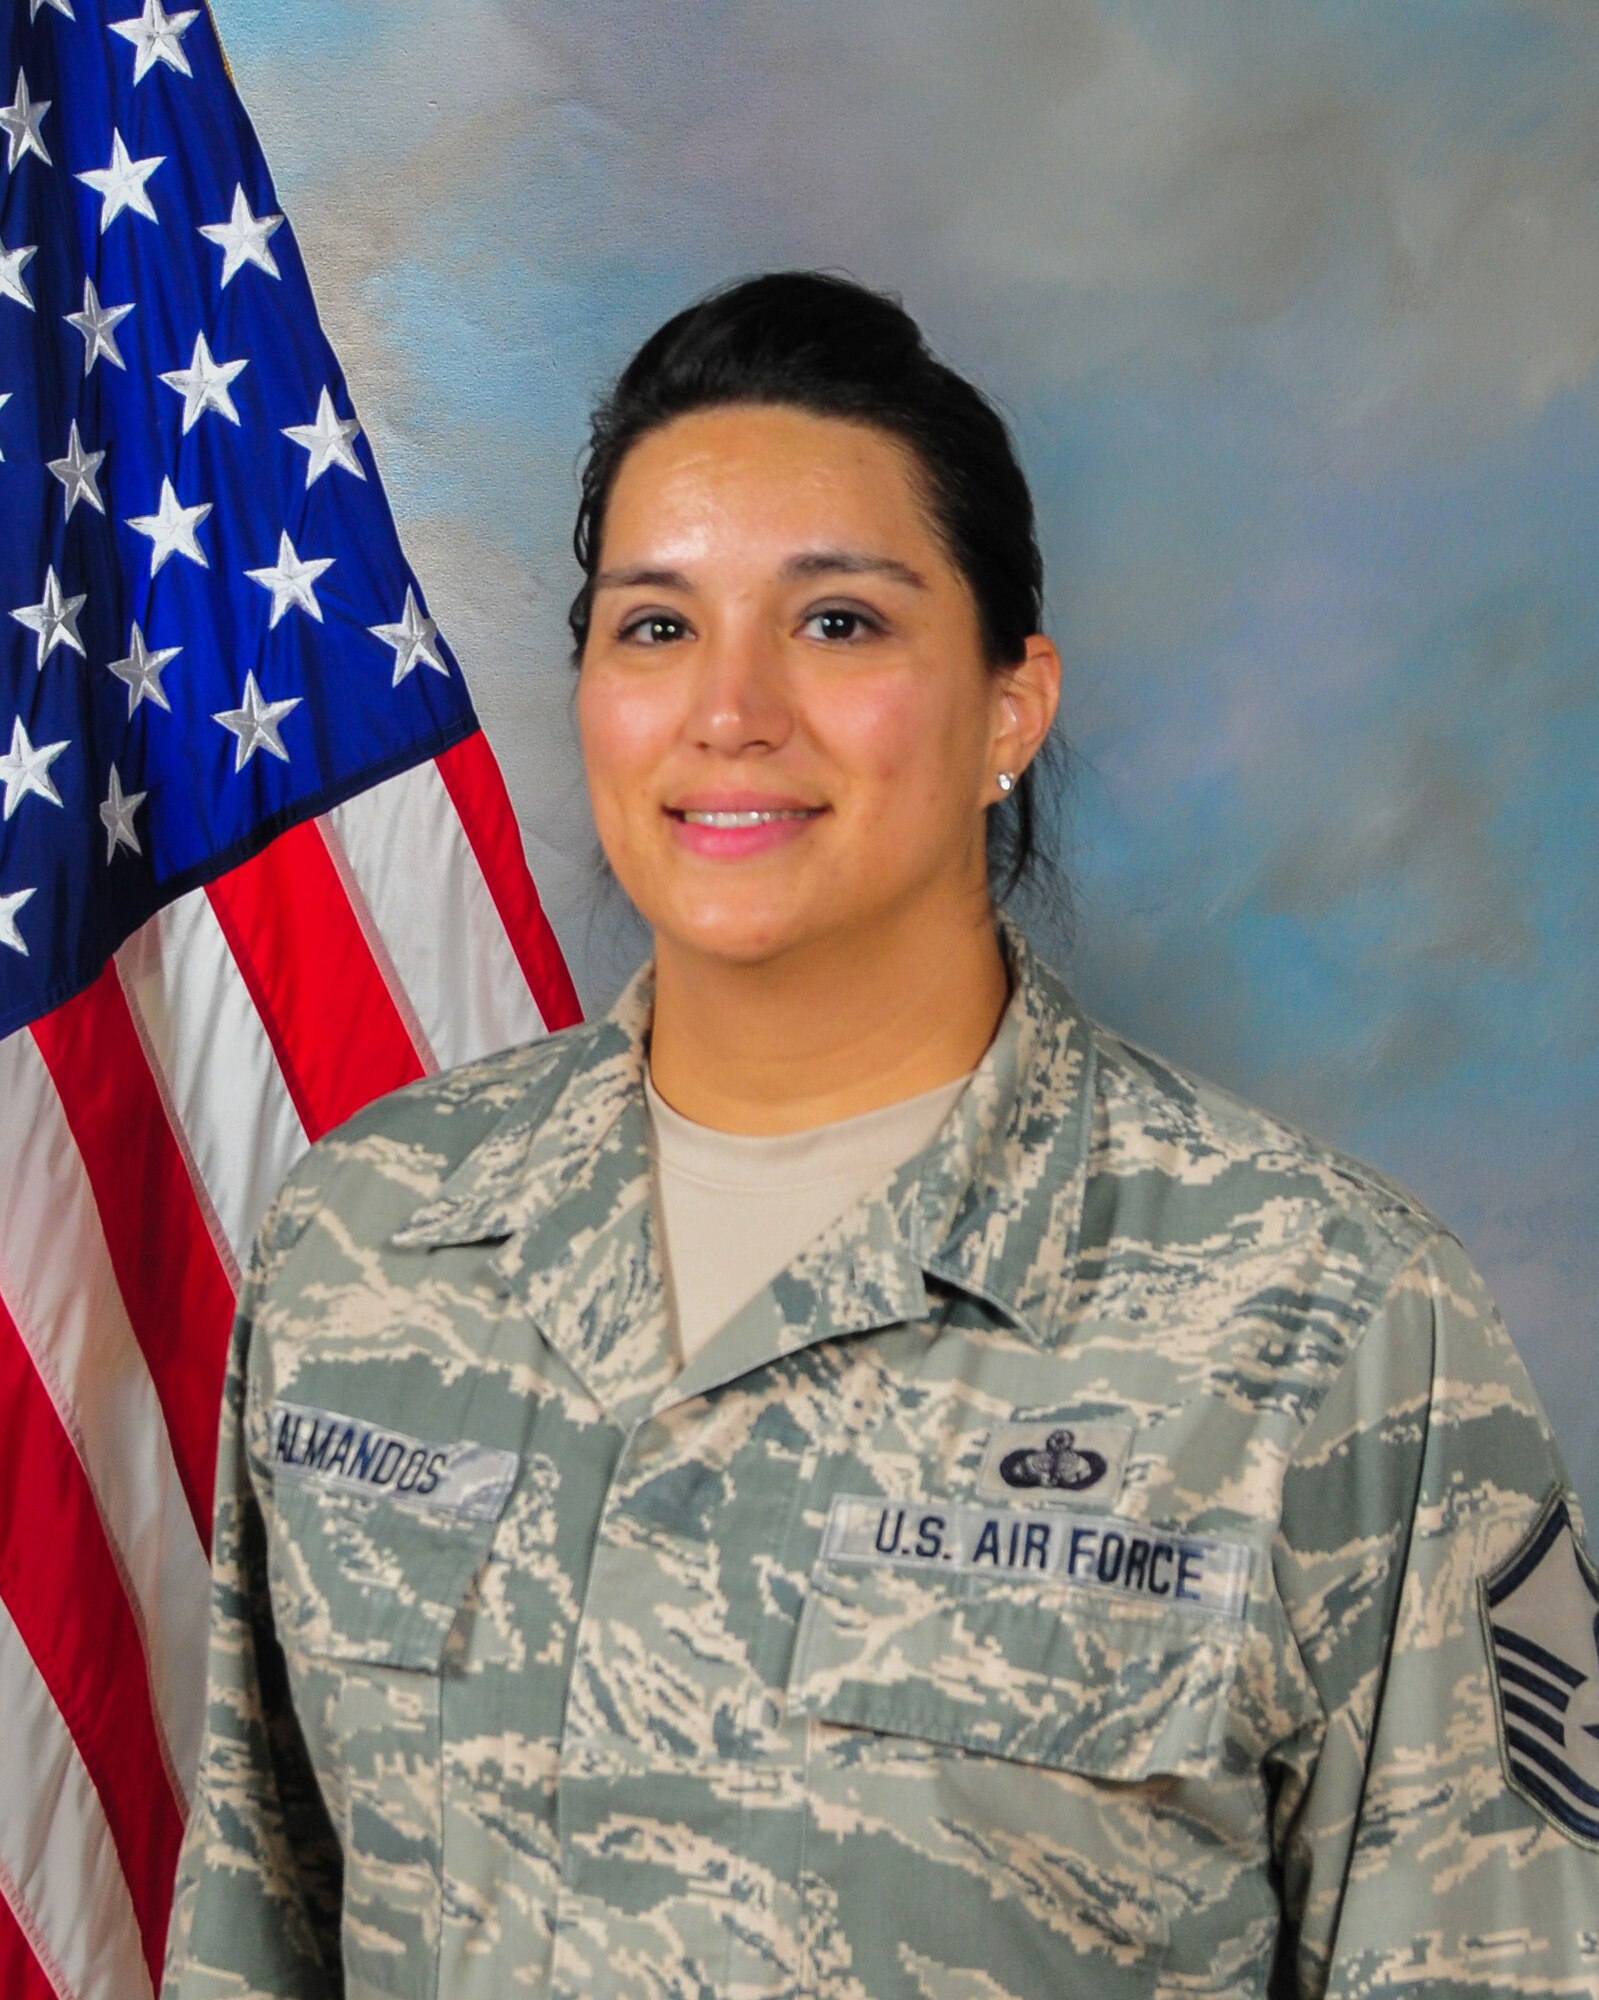 The Arizona Air National Guard’s 161st Air Refueling Wing selected Master Sgt. Livia Almandos as human resource advisor. With over 18 years of service, and an experienced human resource specialist as a federal employee, Almandos’ background supplements the wing staff resources already in place. Almandos began her new role Aug. 8. 